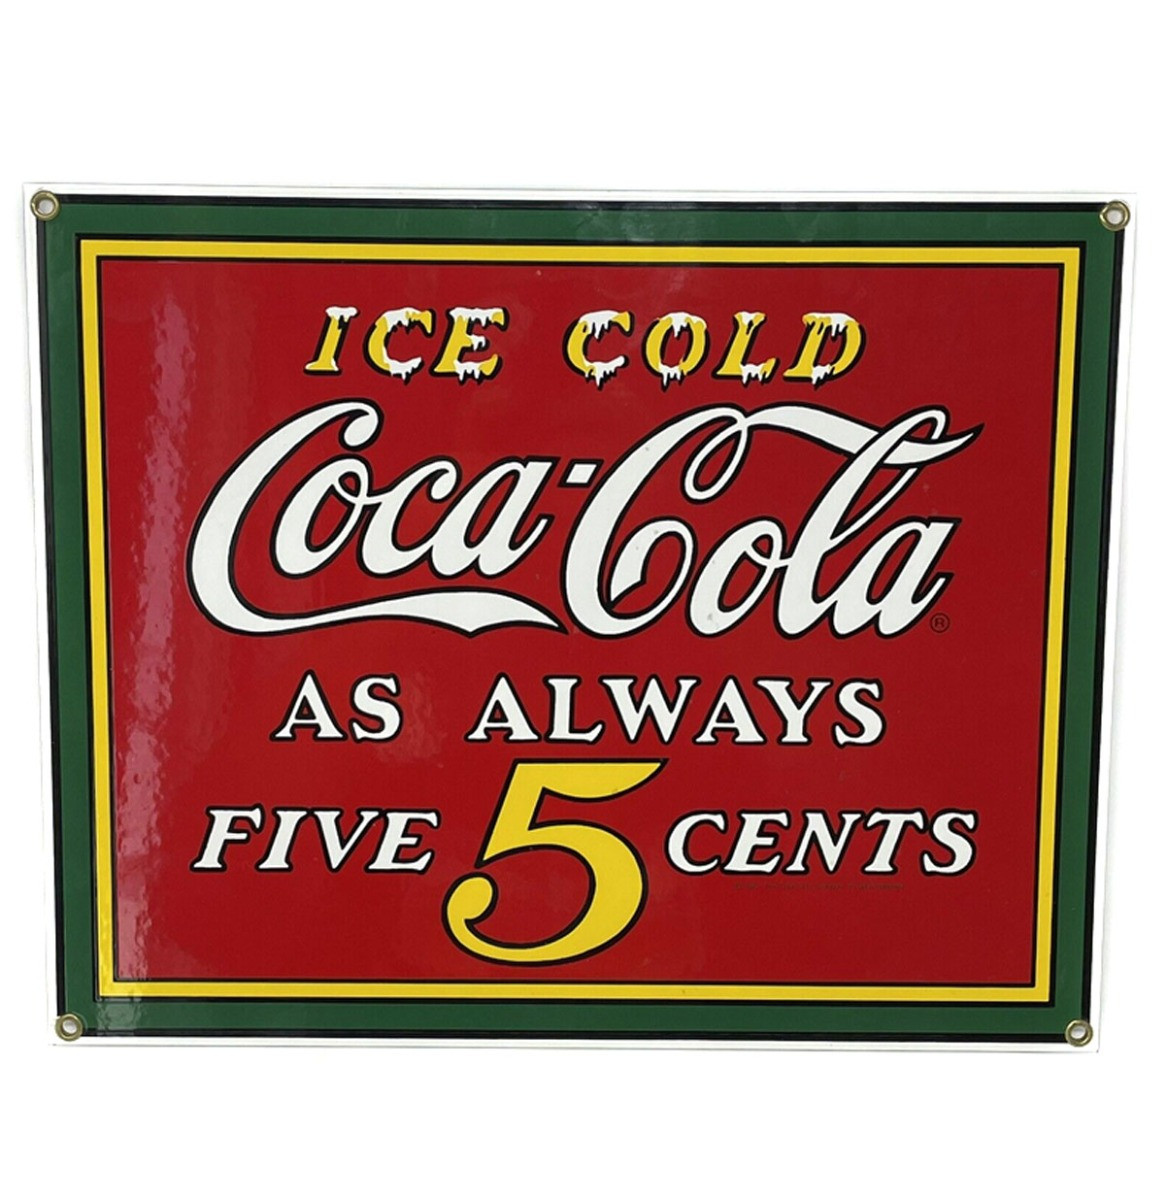 Coca-Cola - Ice Cold As Always 5 Cents Emaille Bord - Ande Rooney - 1990